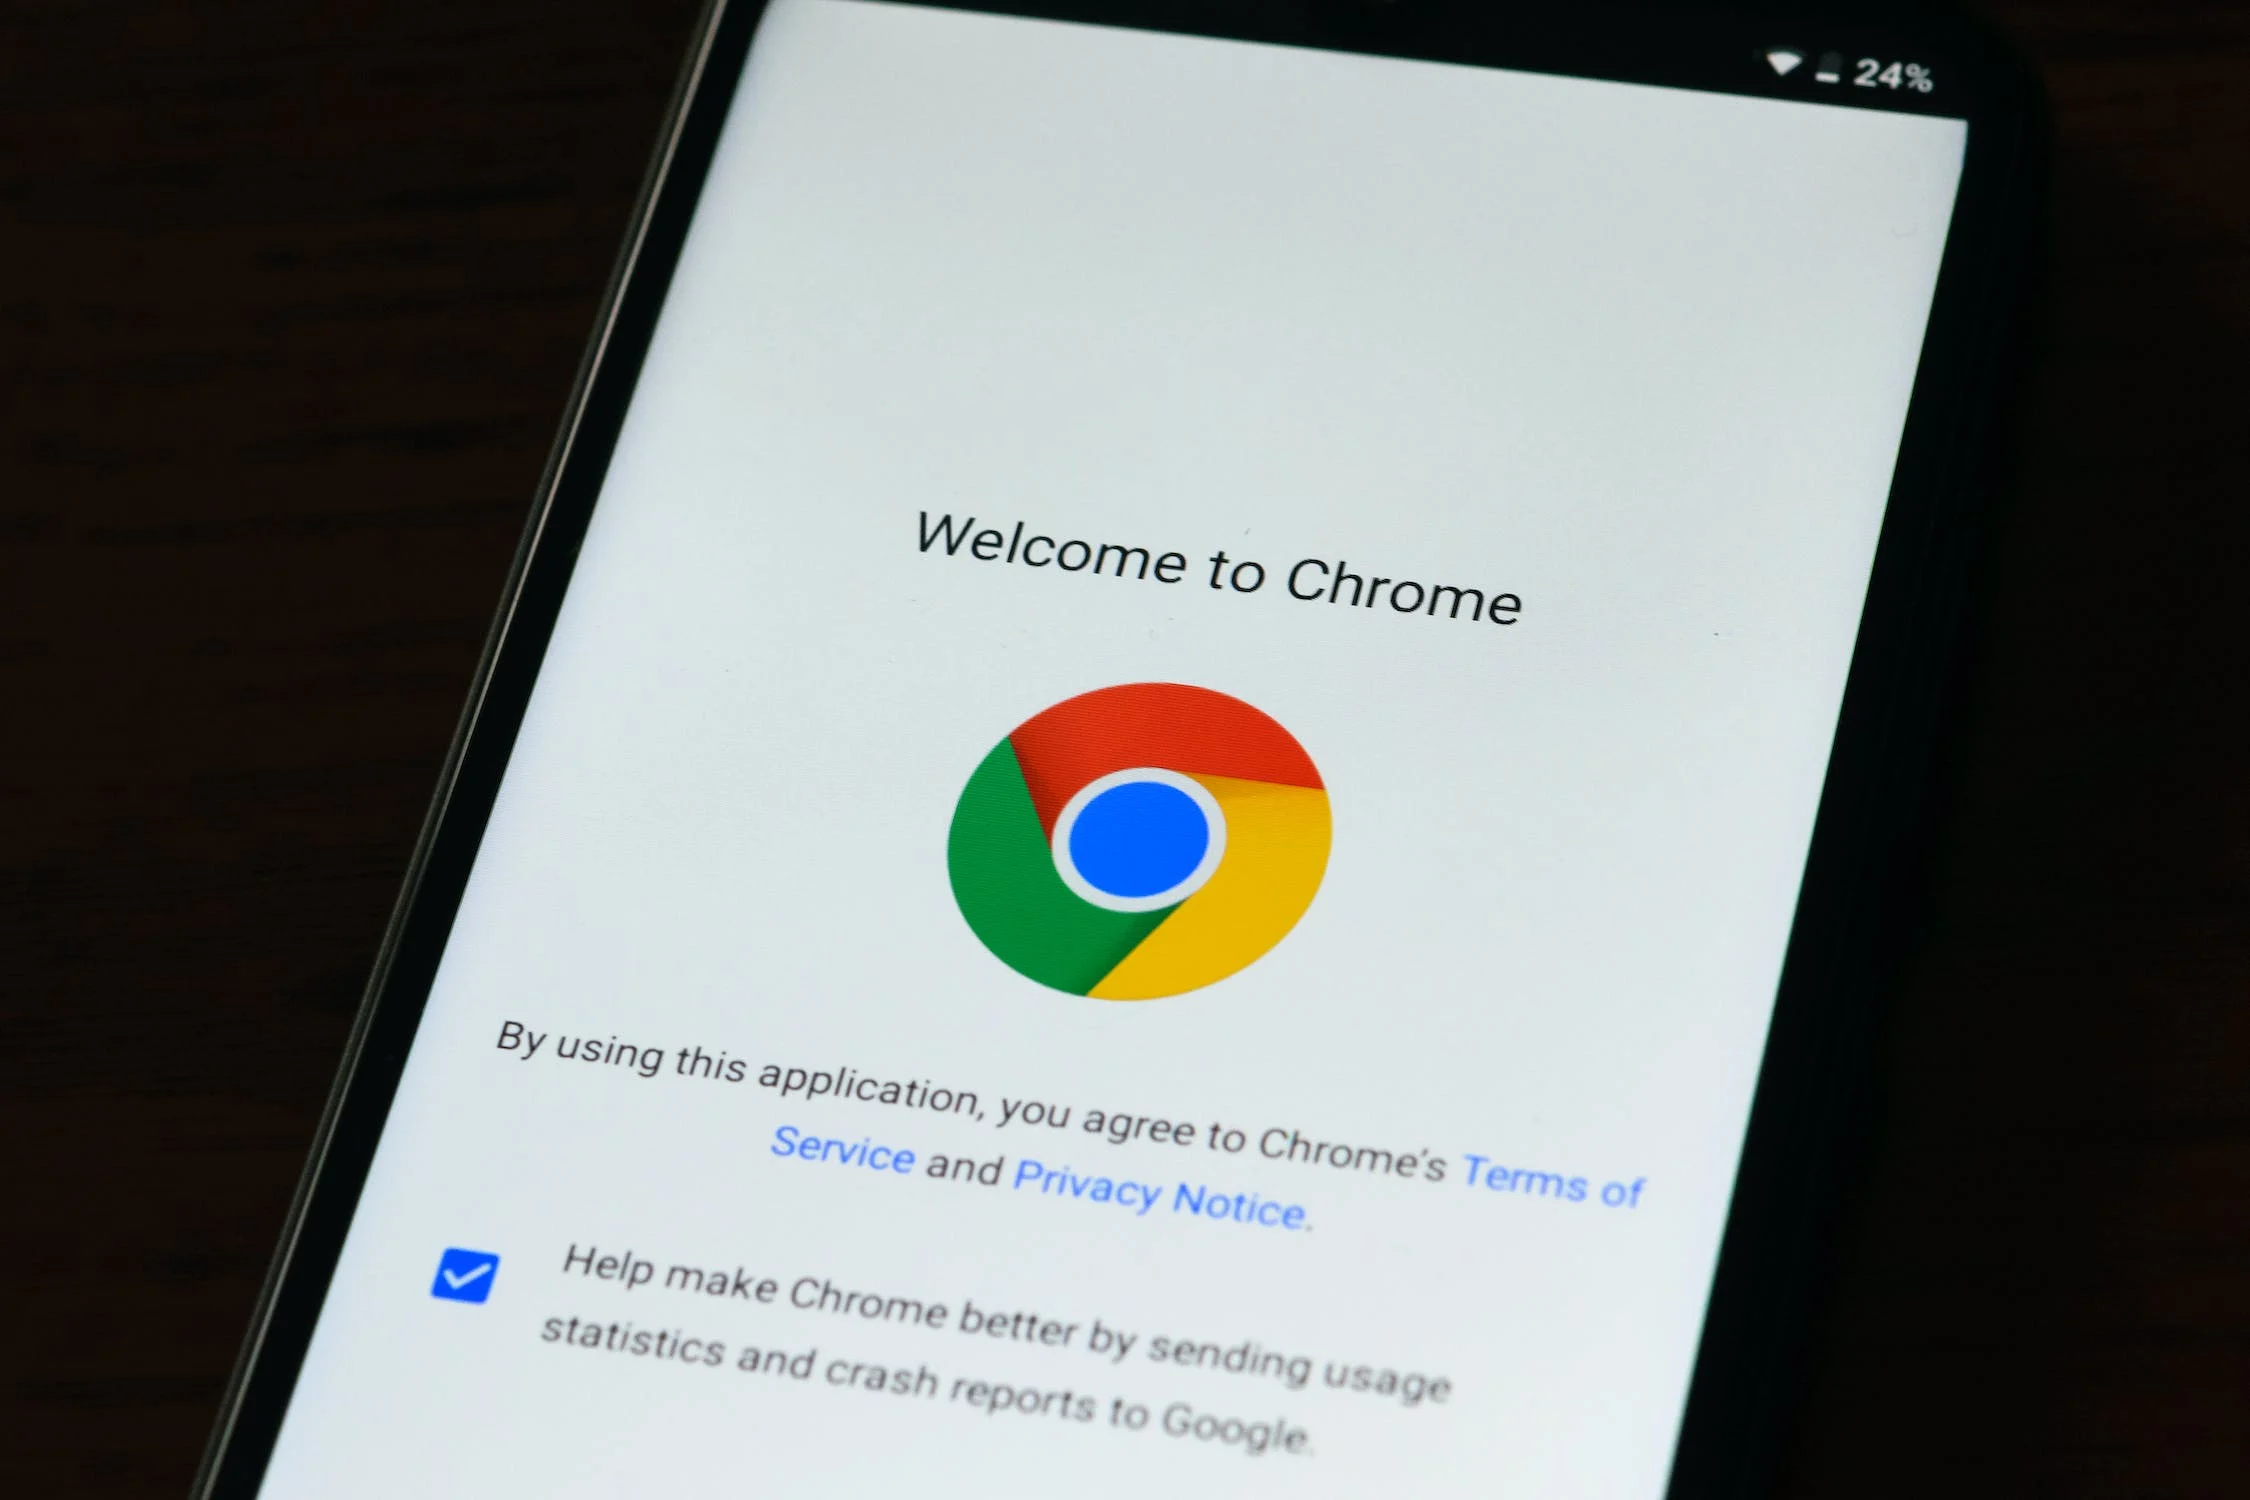 Google Chrome is the most popular browser